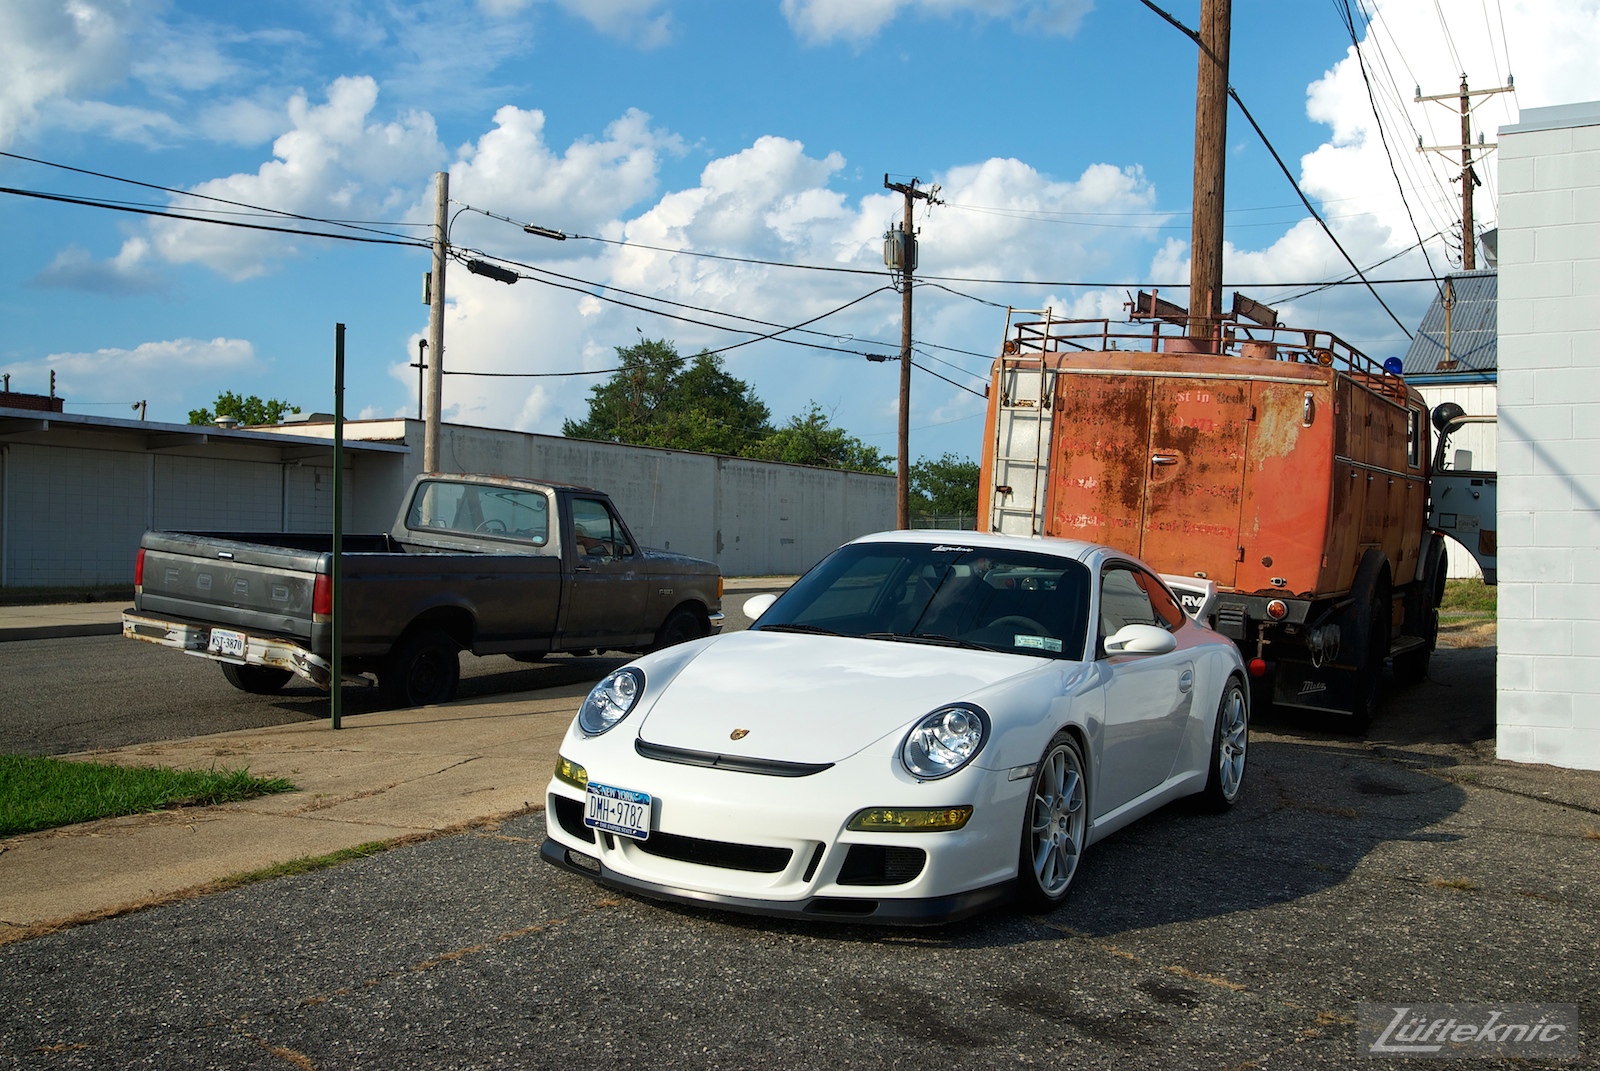 A white Porsche Gt3 poses with the Lufteknic fire truck in the parking lot, with an Ford in the background.